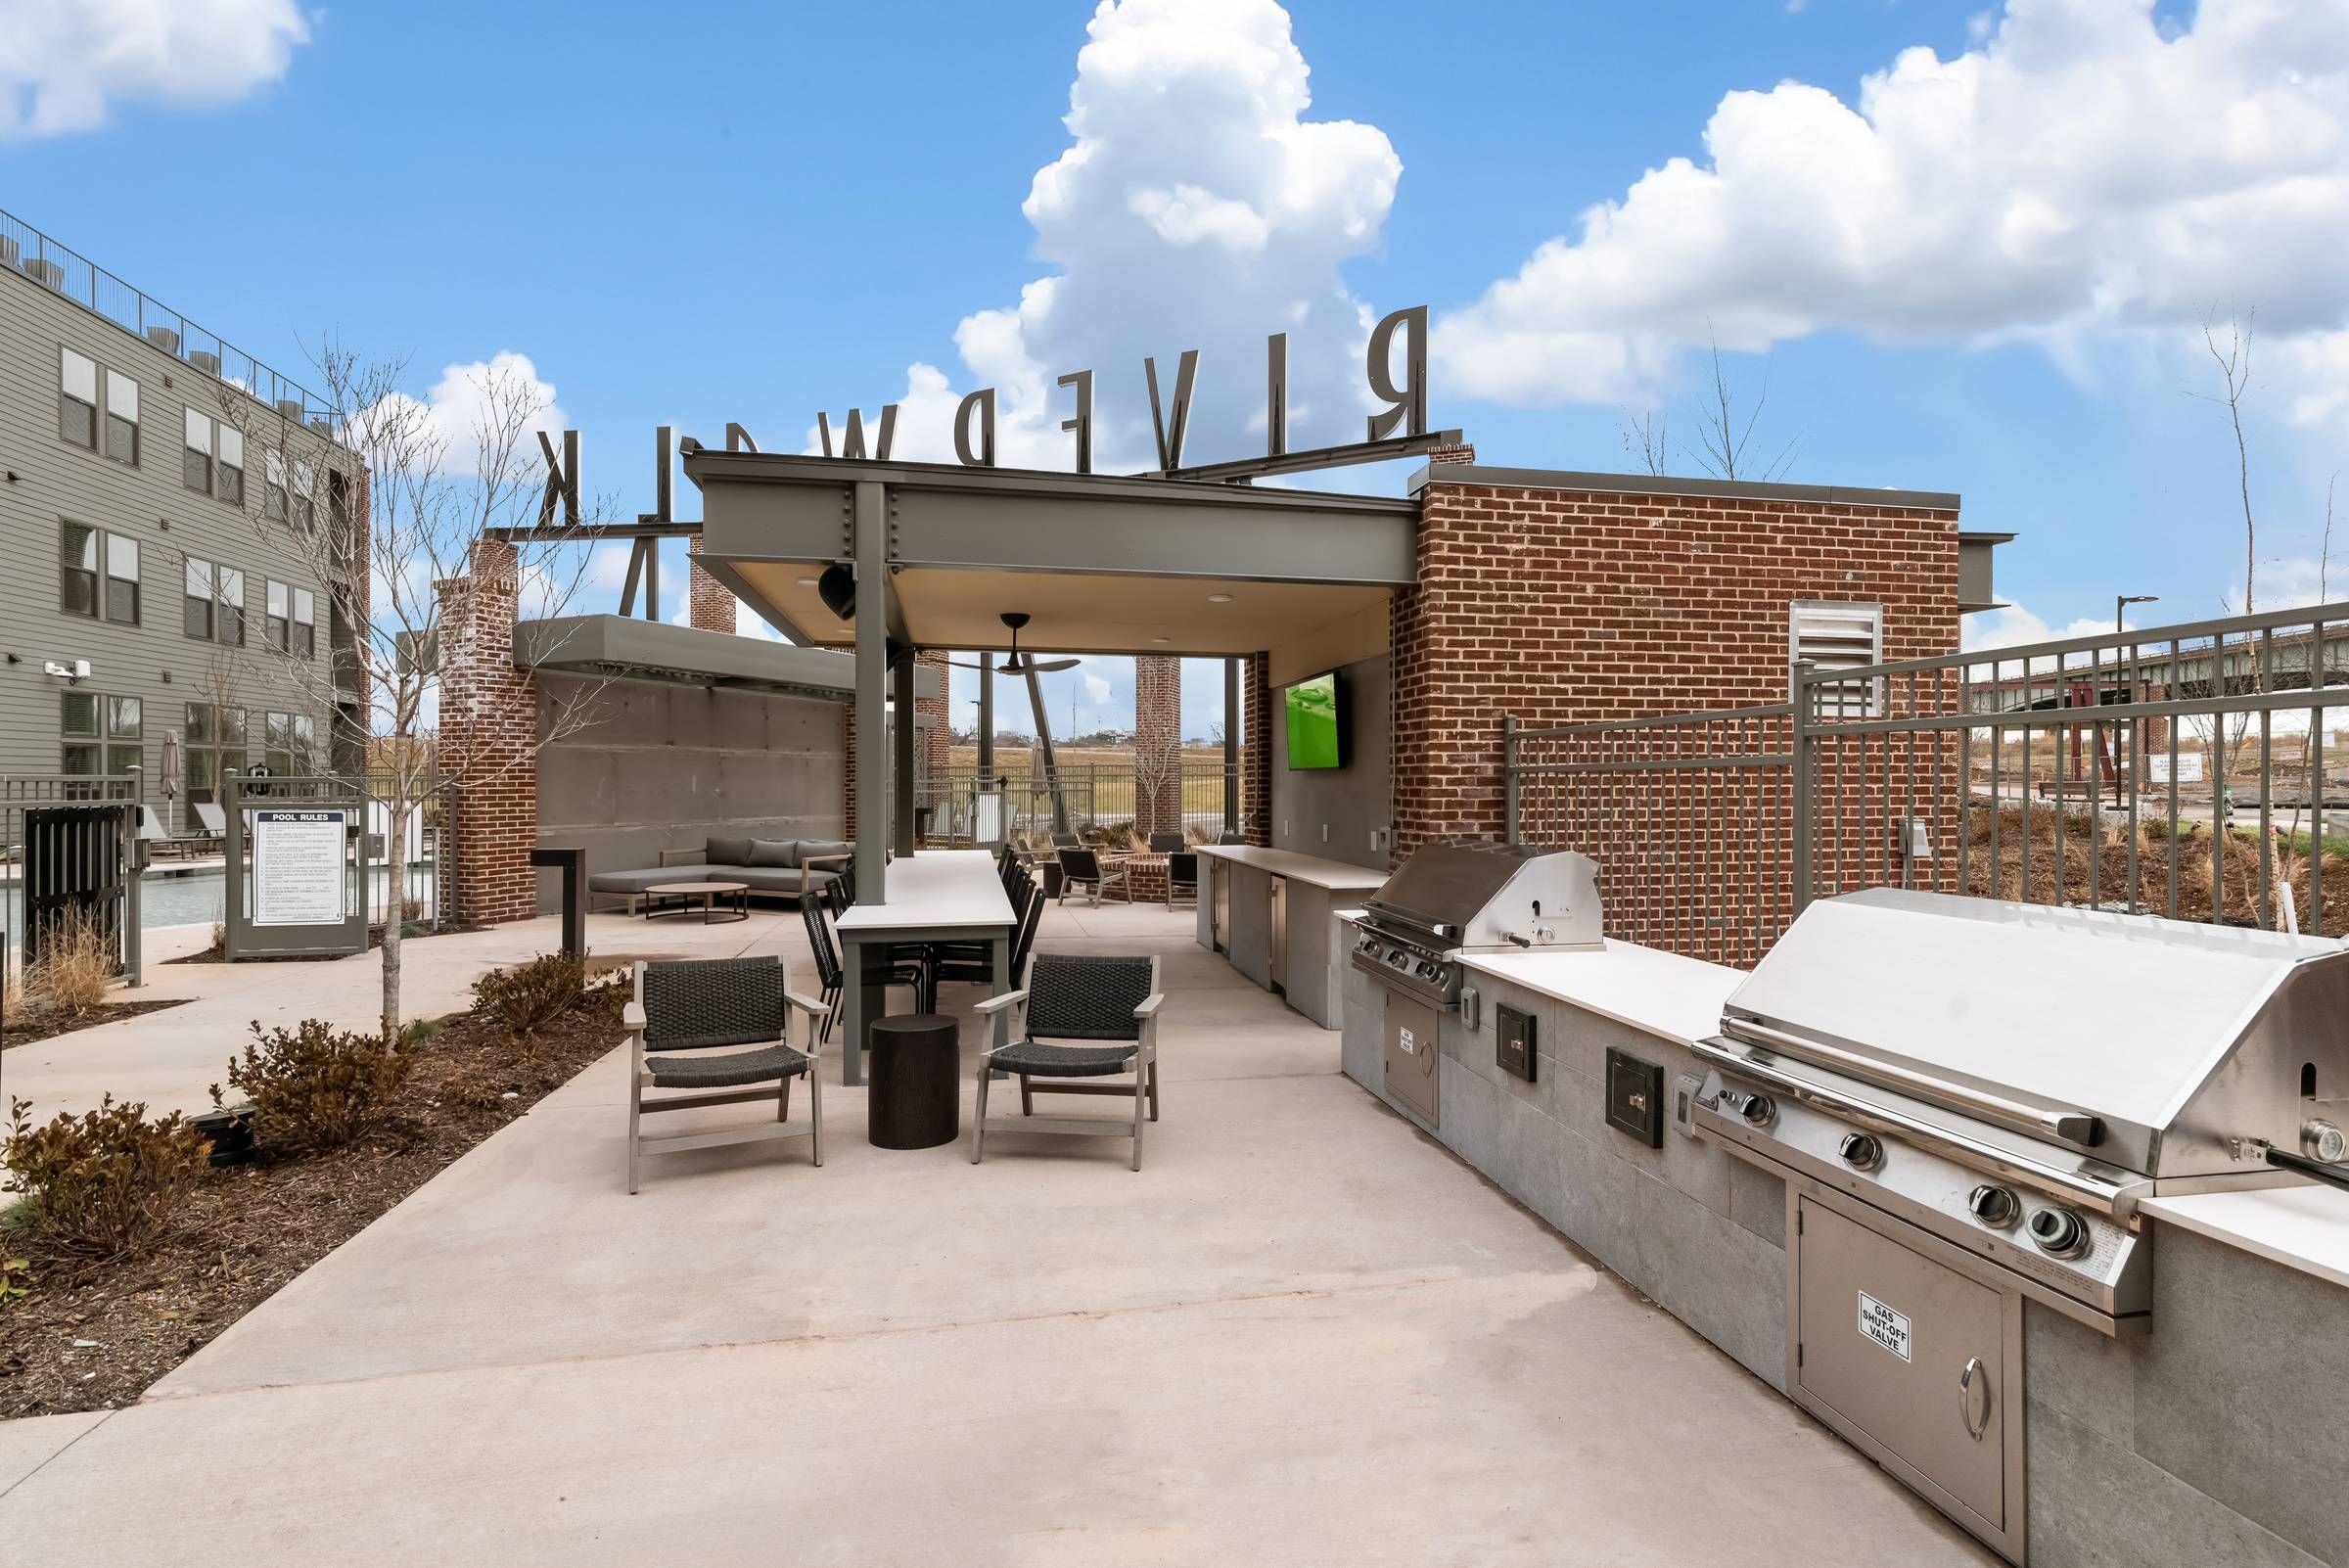 Alta Riverwalk outdoor grilling area with dining tables.